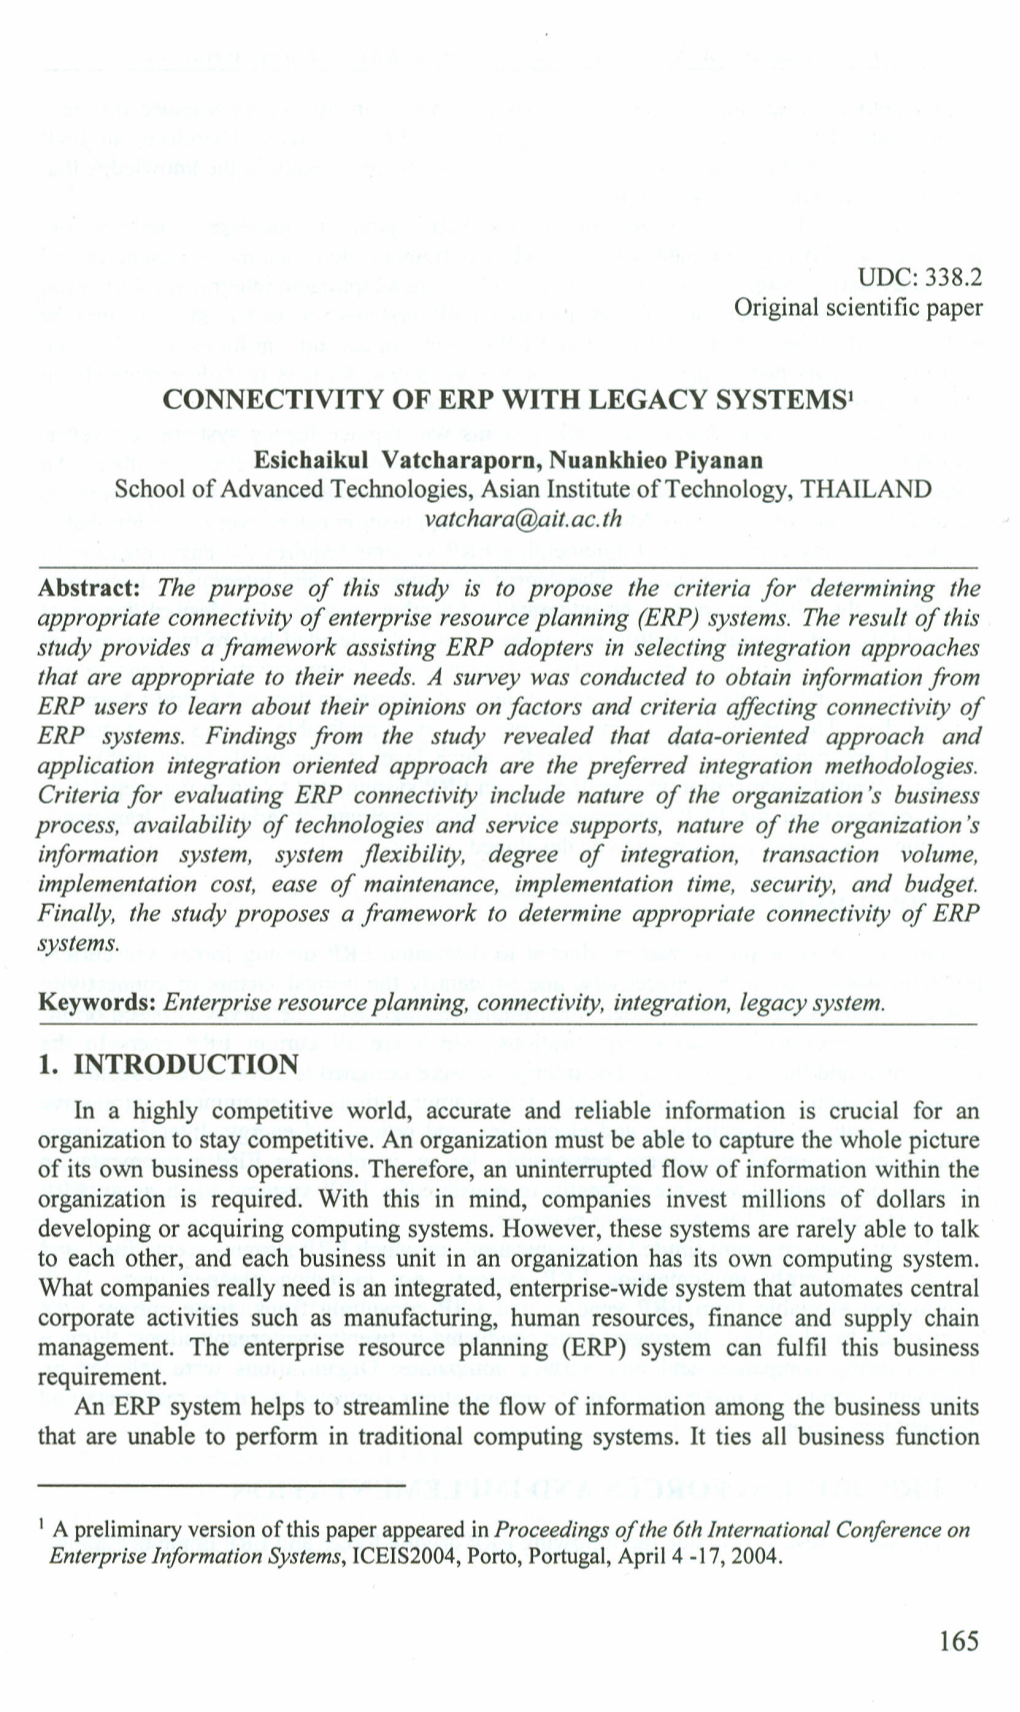 Connectivity of Erp with Legacy Systems) 1